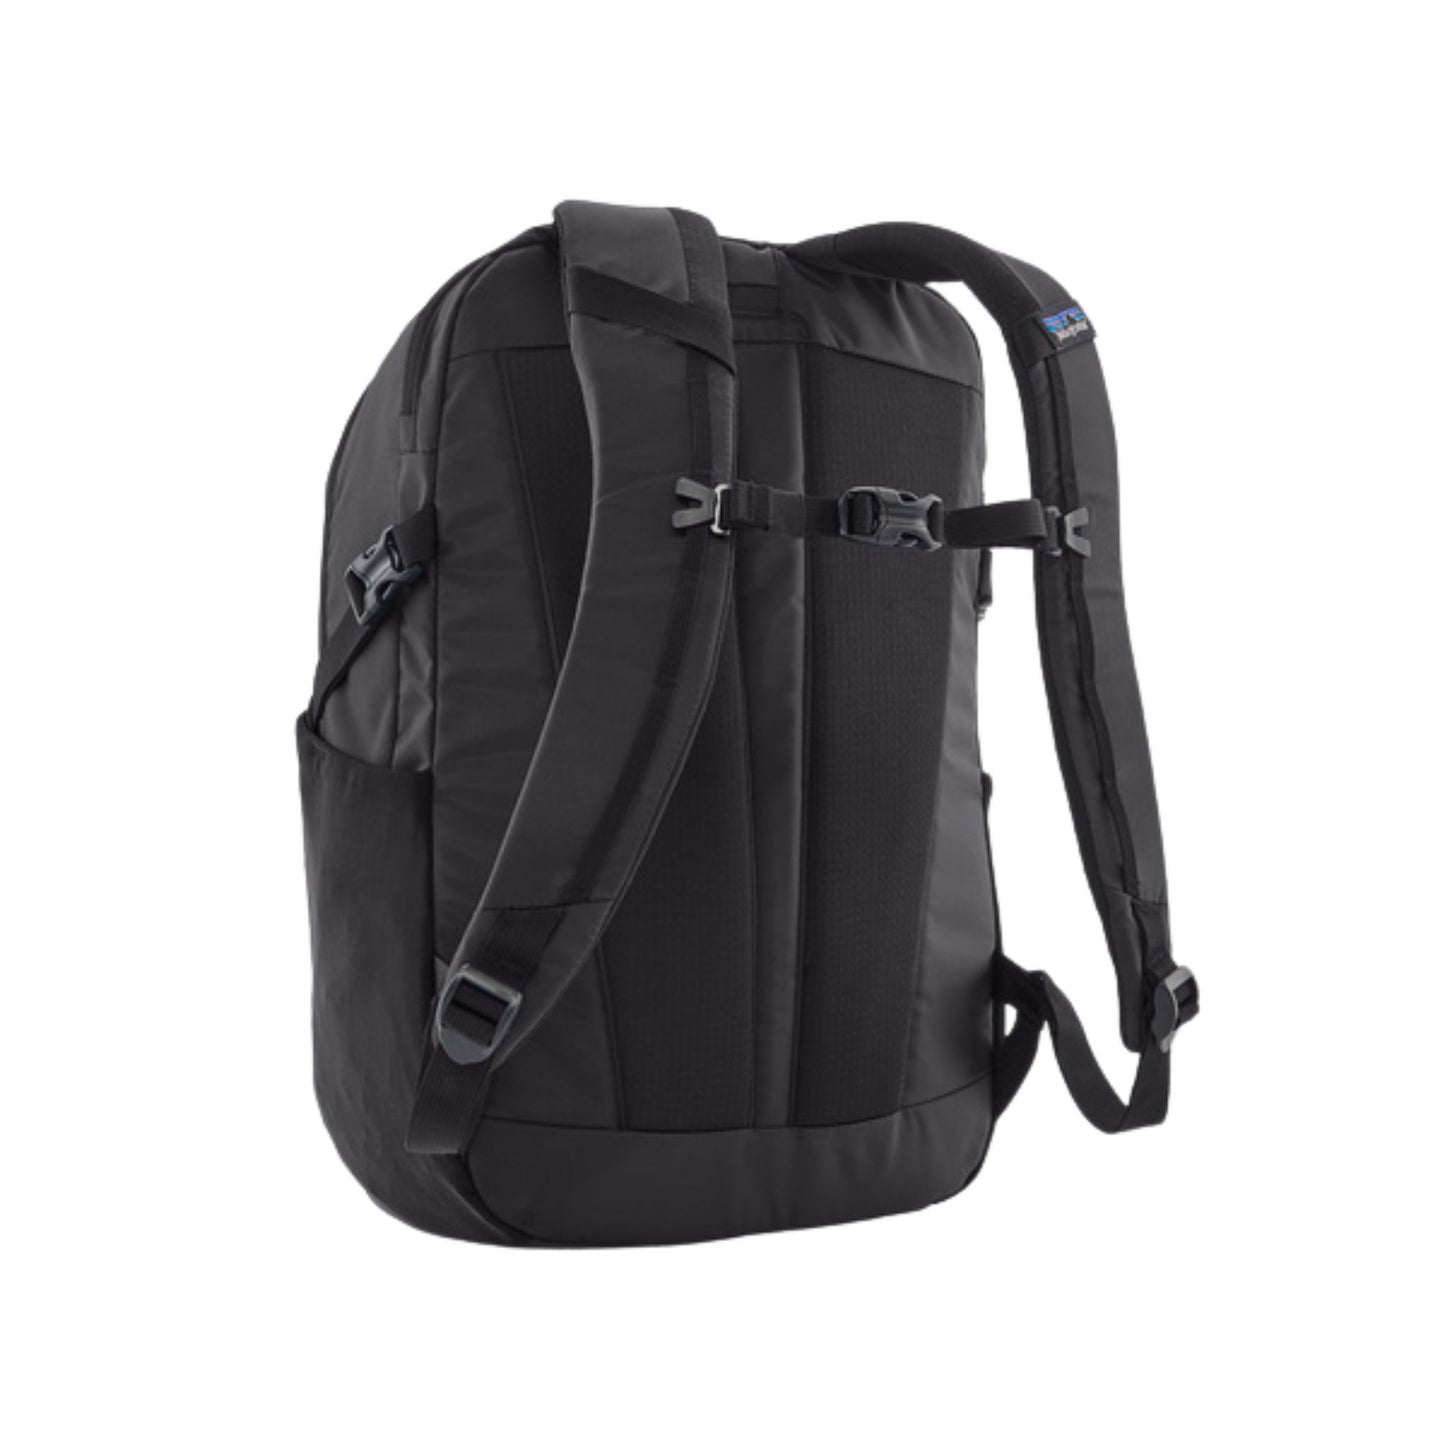 PATAGONIA - Refugio Day Pack 26L